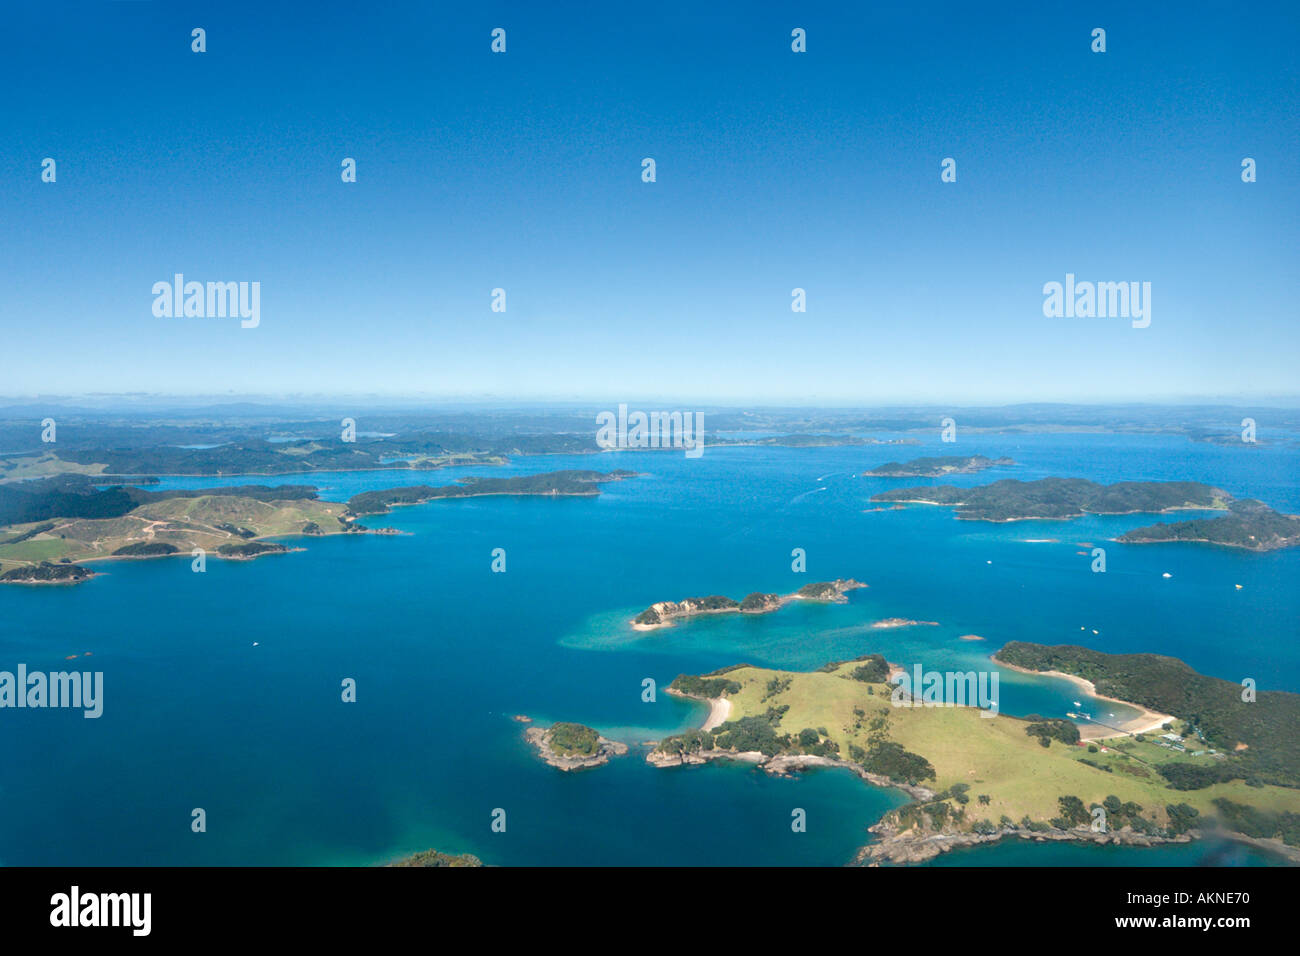 Aerial view of the Bay of Islands from a small plane, Northland, North Island, New Zealand Stock Photo